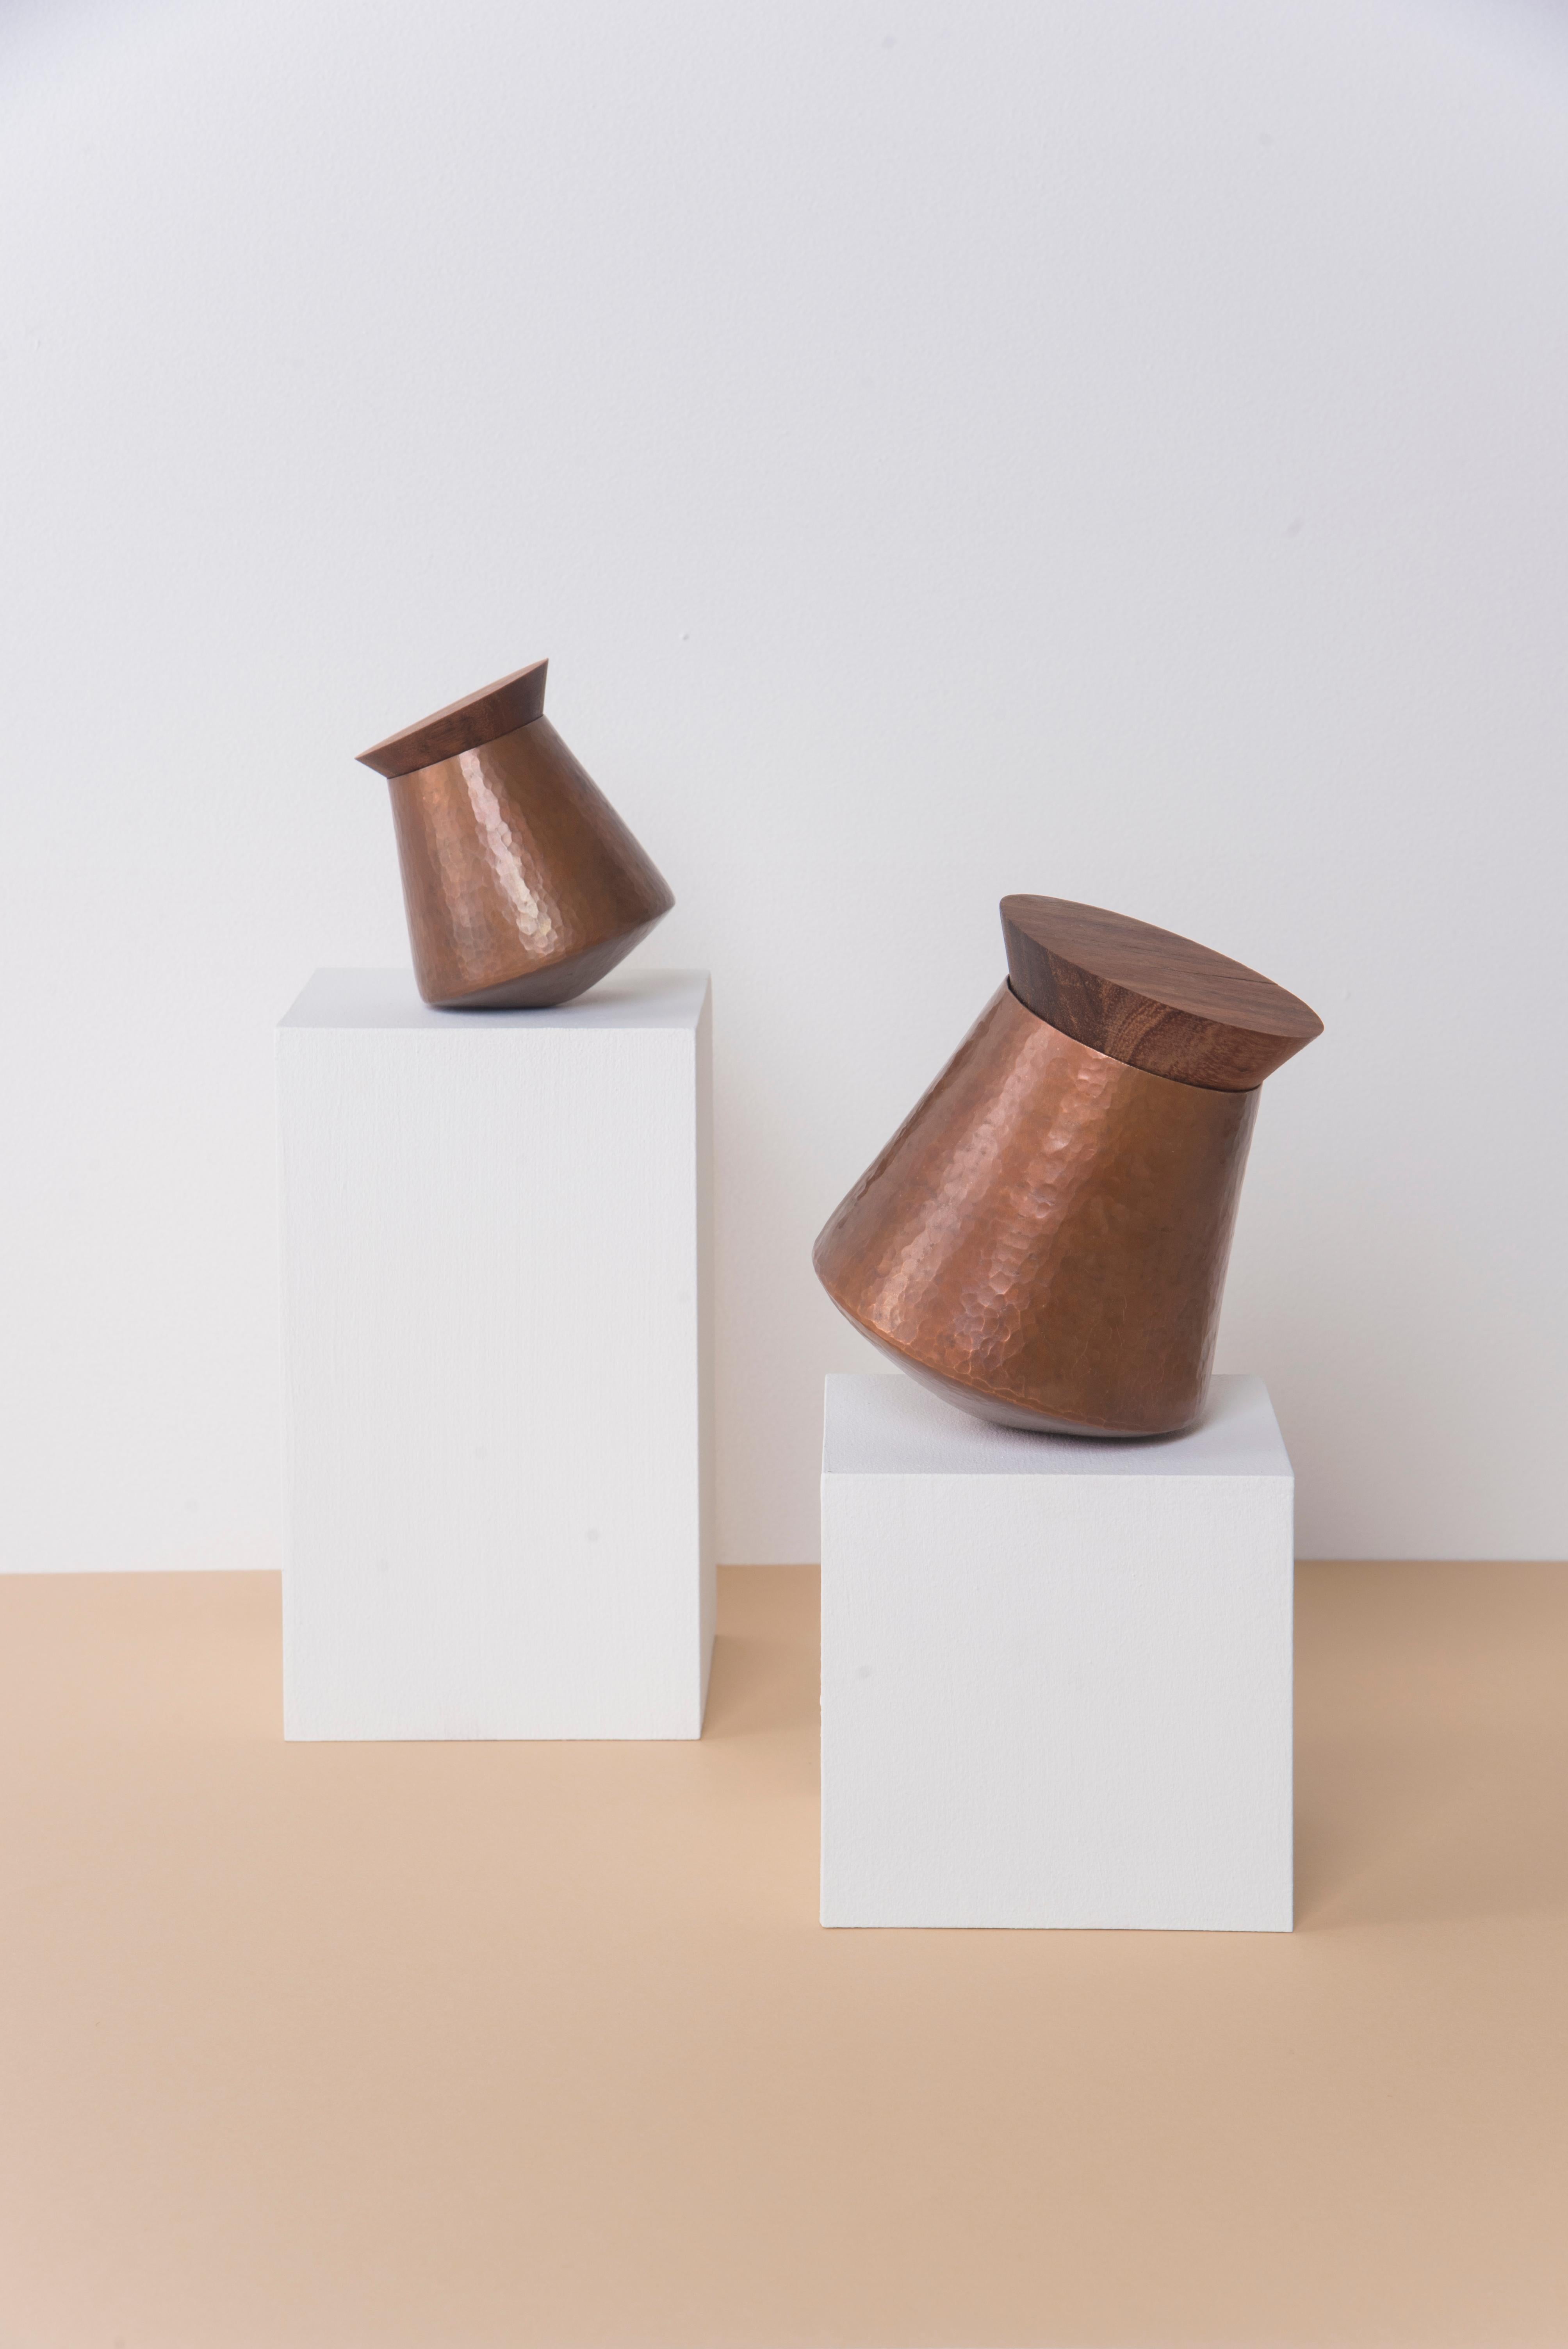 Contemporary Set of Hammered Copper Containers with Patinated Finish and Rosamorada Wood Lid For Sale